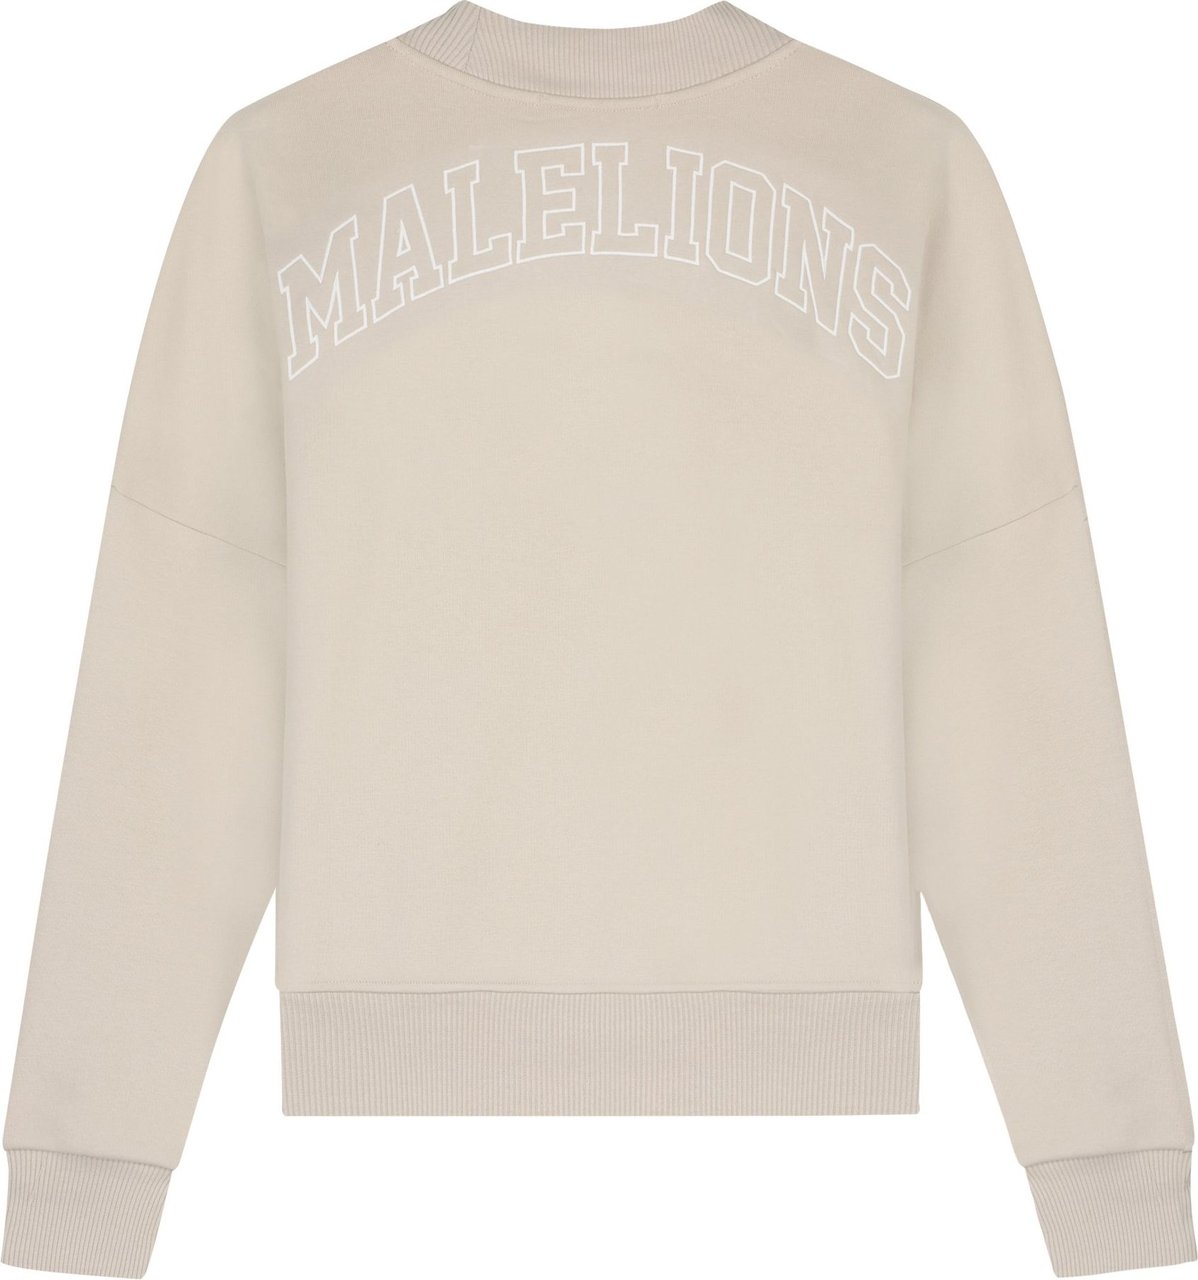 Malelions Brand Sweater - Taupe Taupe